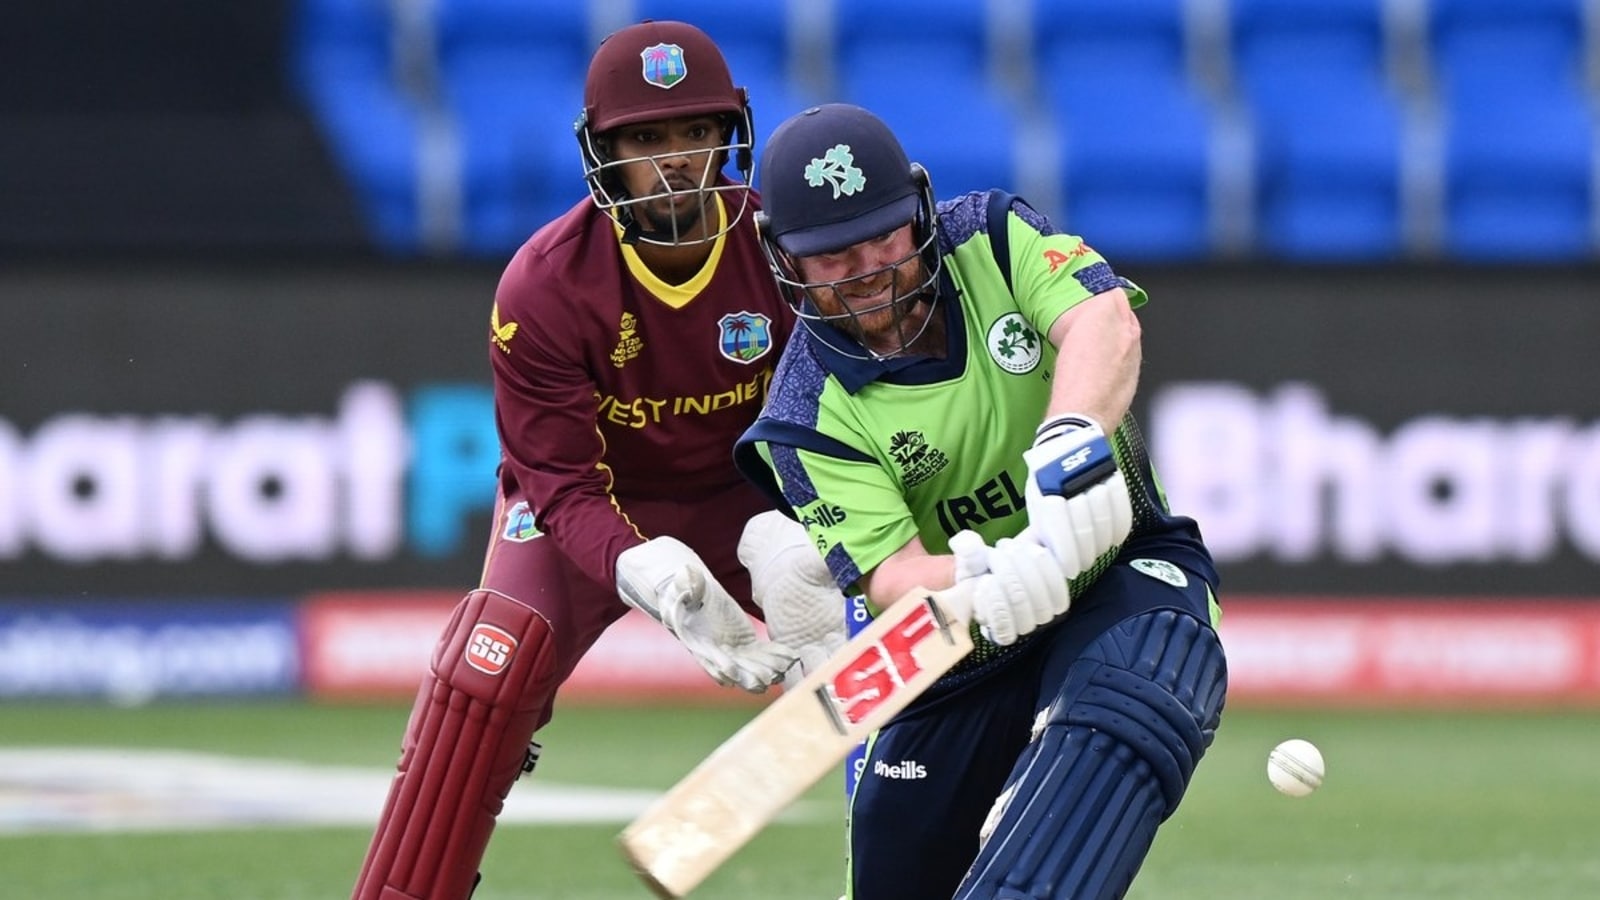 ireland-knock-two-time-champions-west-indies-out-of-t20-world-cup-2022-reach-super-12-stage